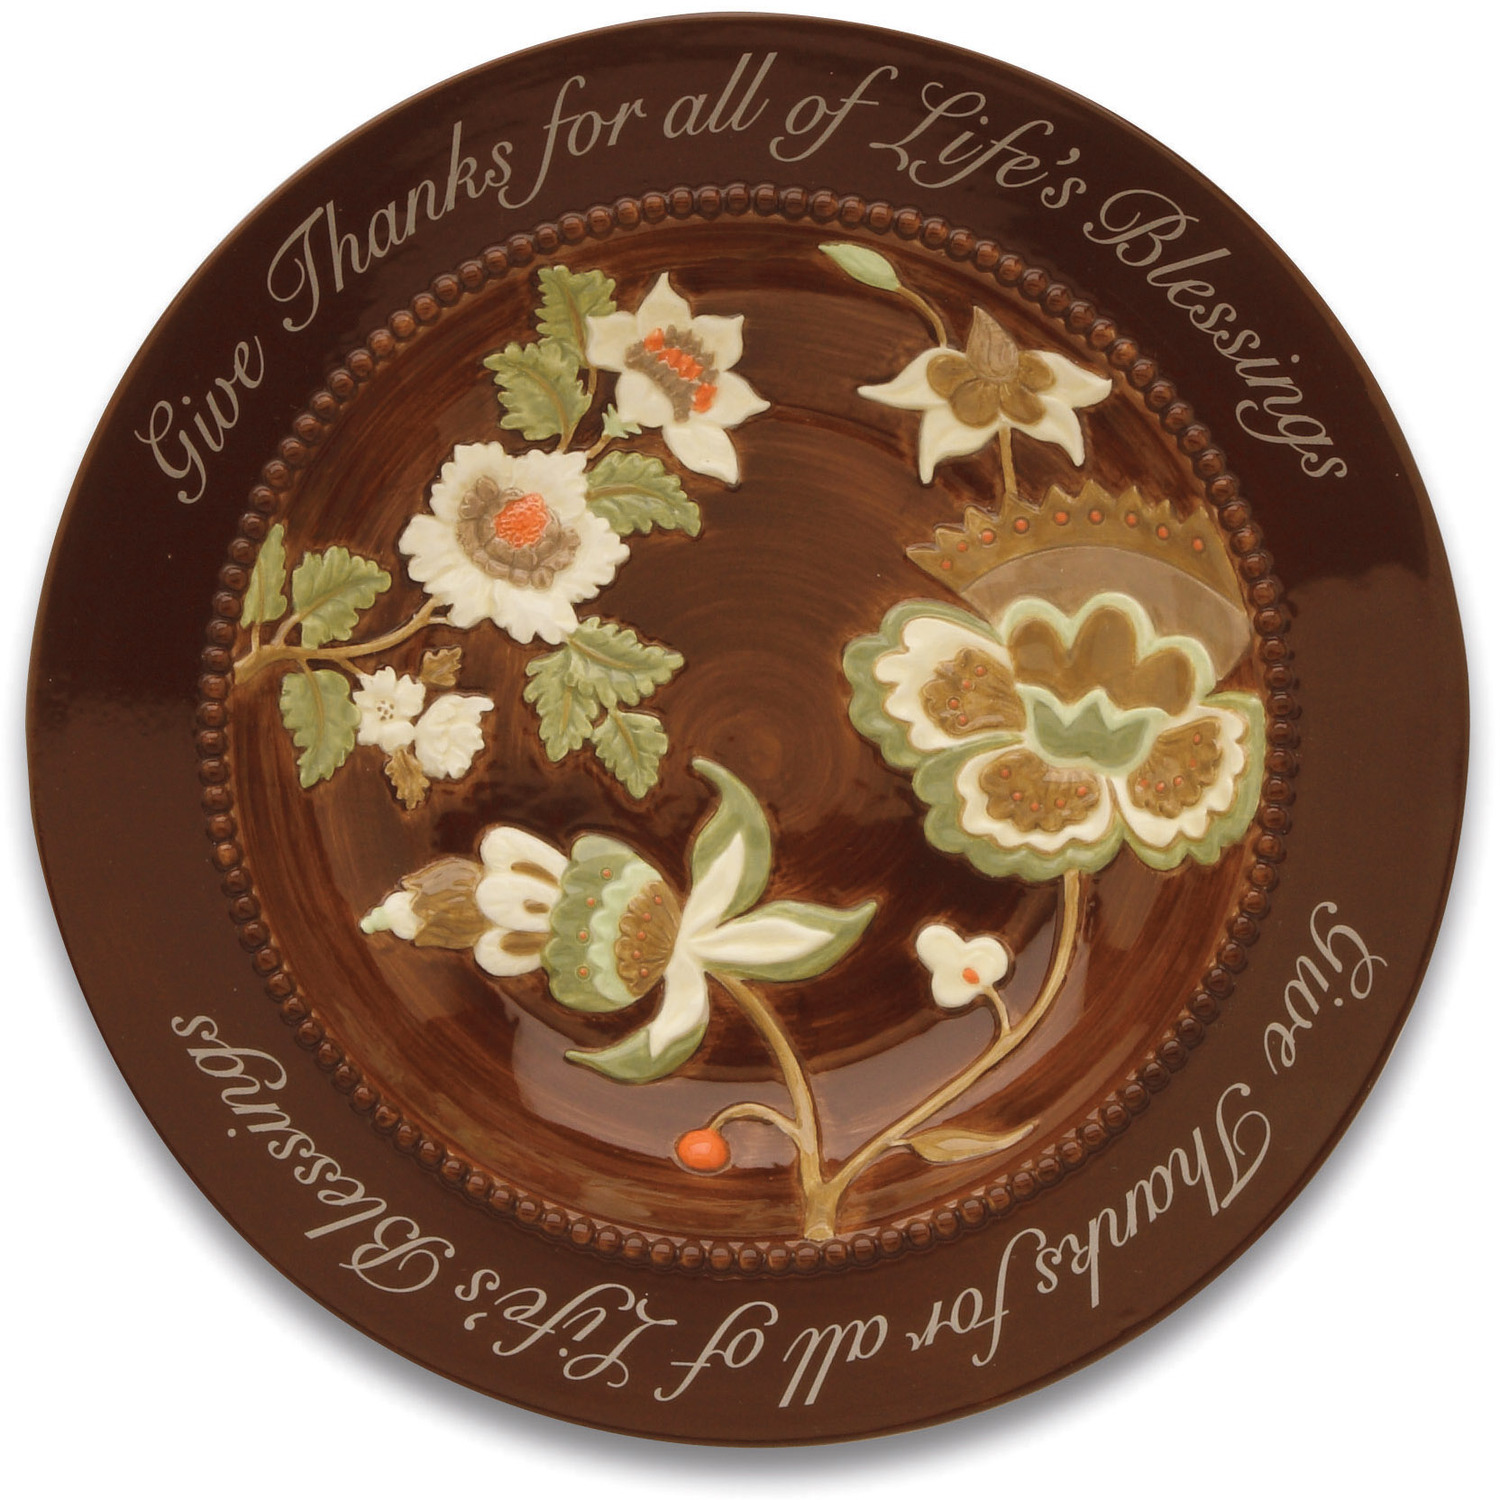 Life's Blessings by Shared Blessings - Life's Blessings - 8.1" x 1.4" Floral Bowl (Set of 2)